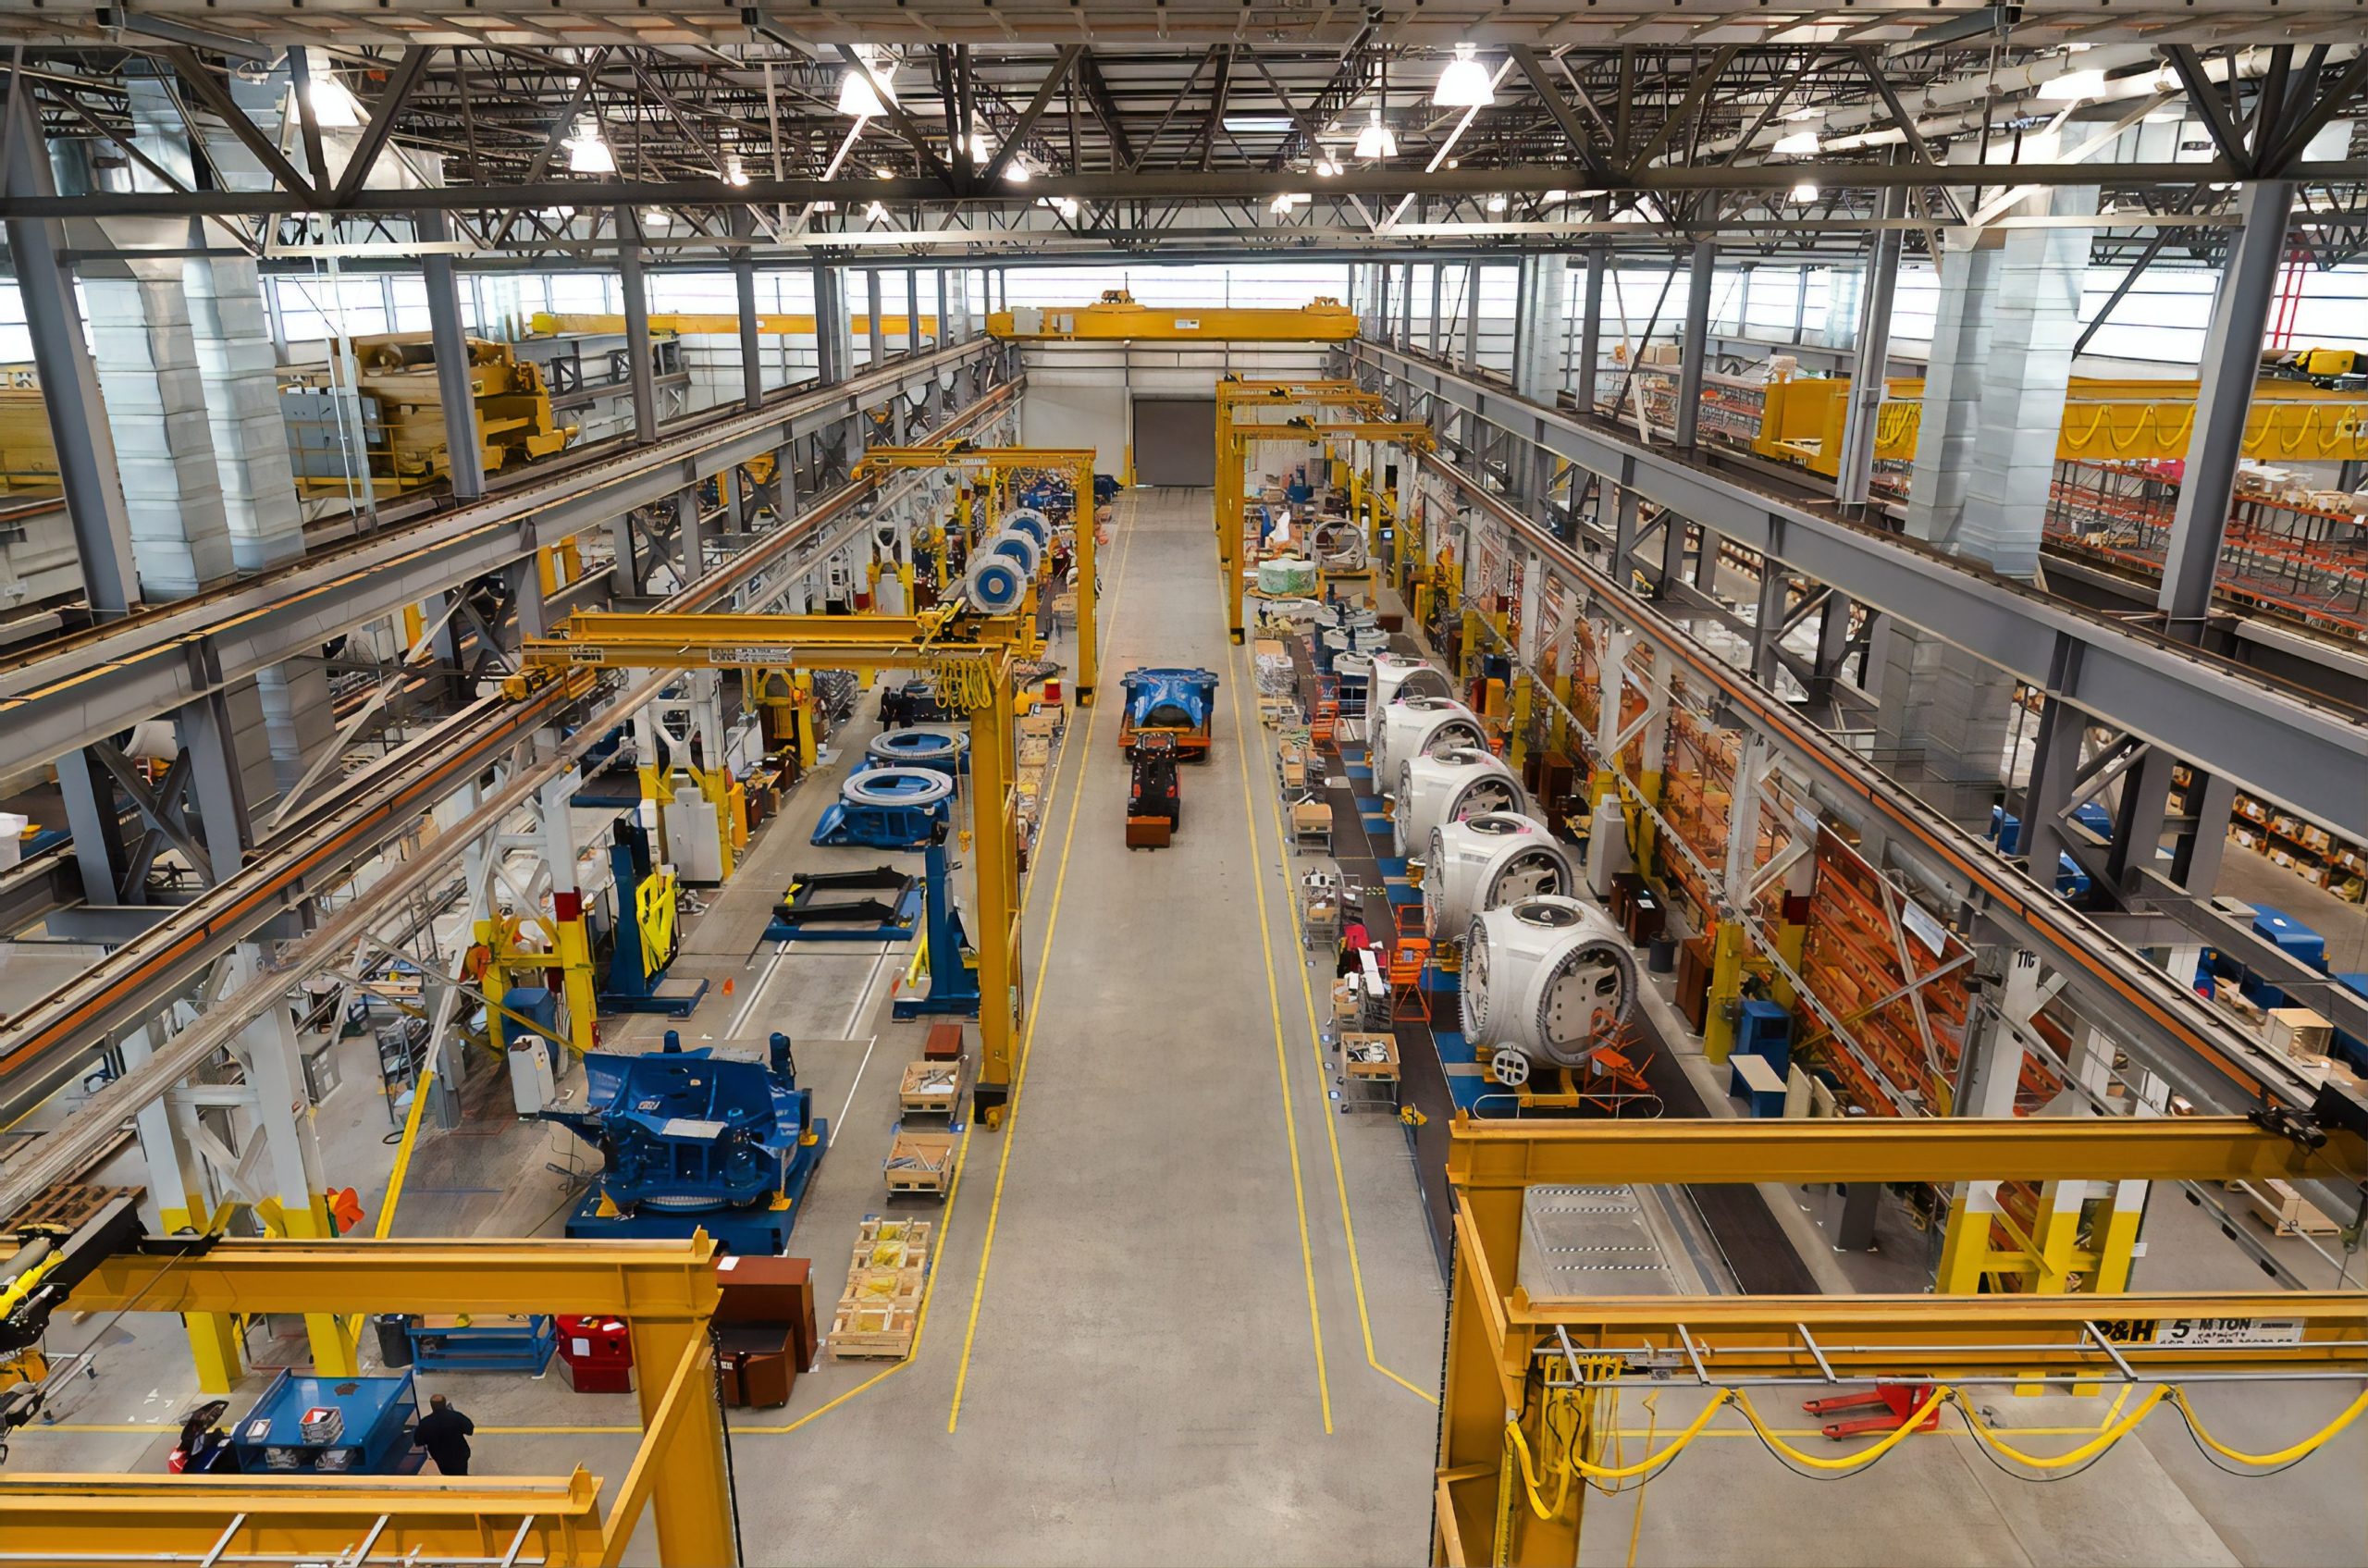 News image: Big manufacturing shopfloor, wit multiple machines being operated by humans